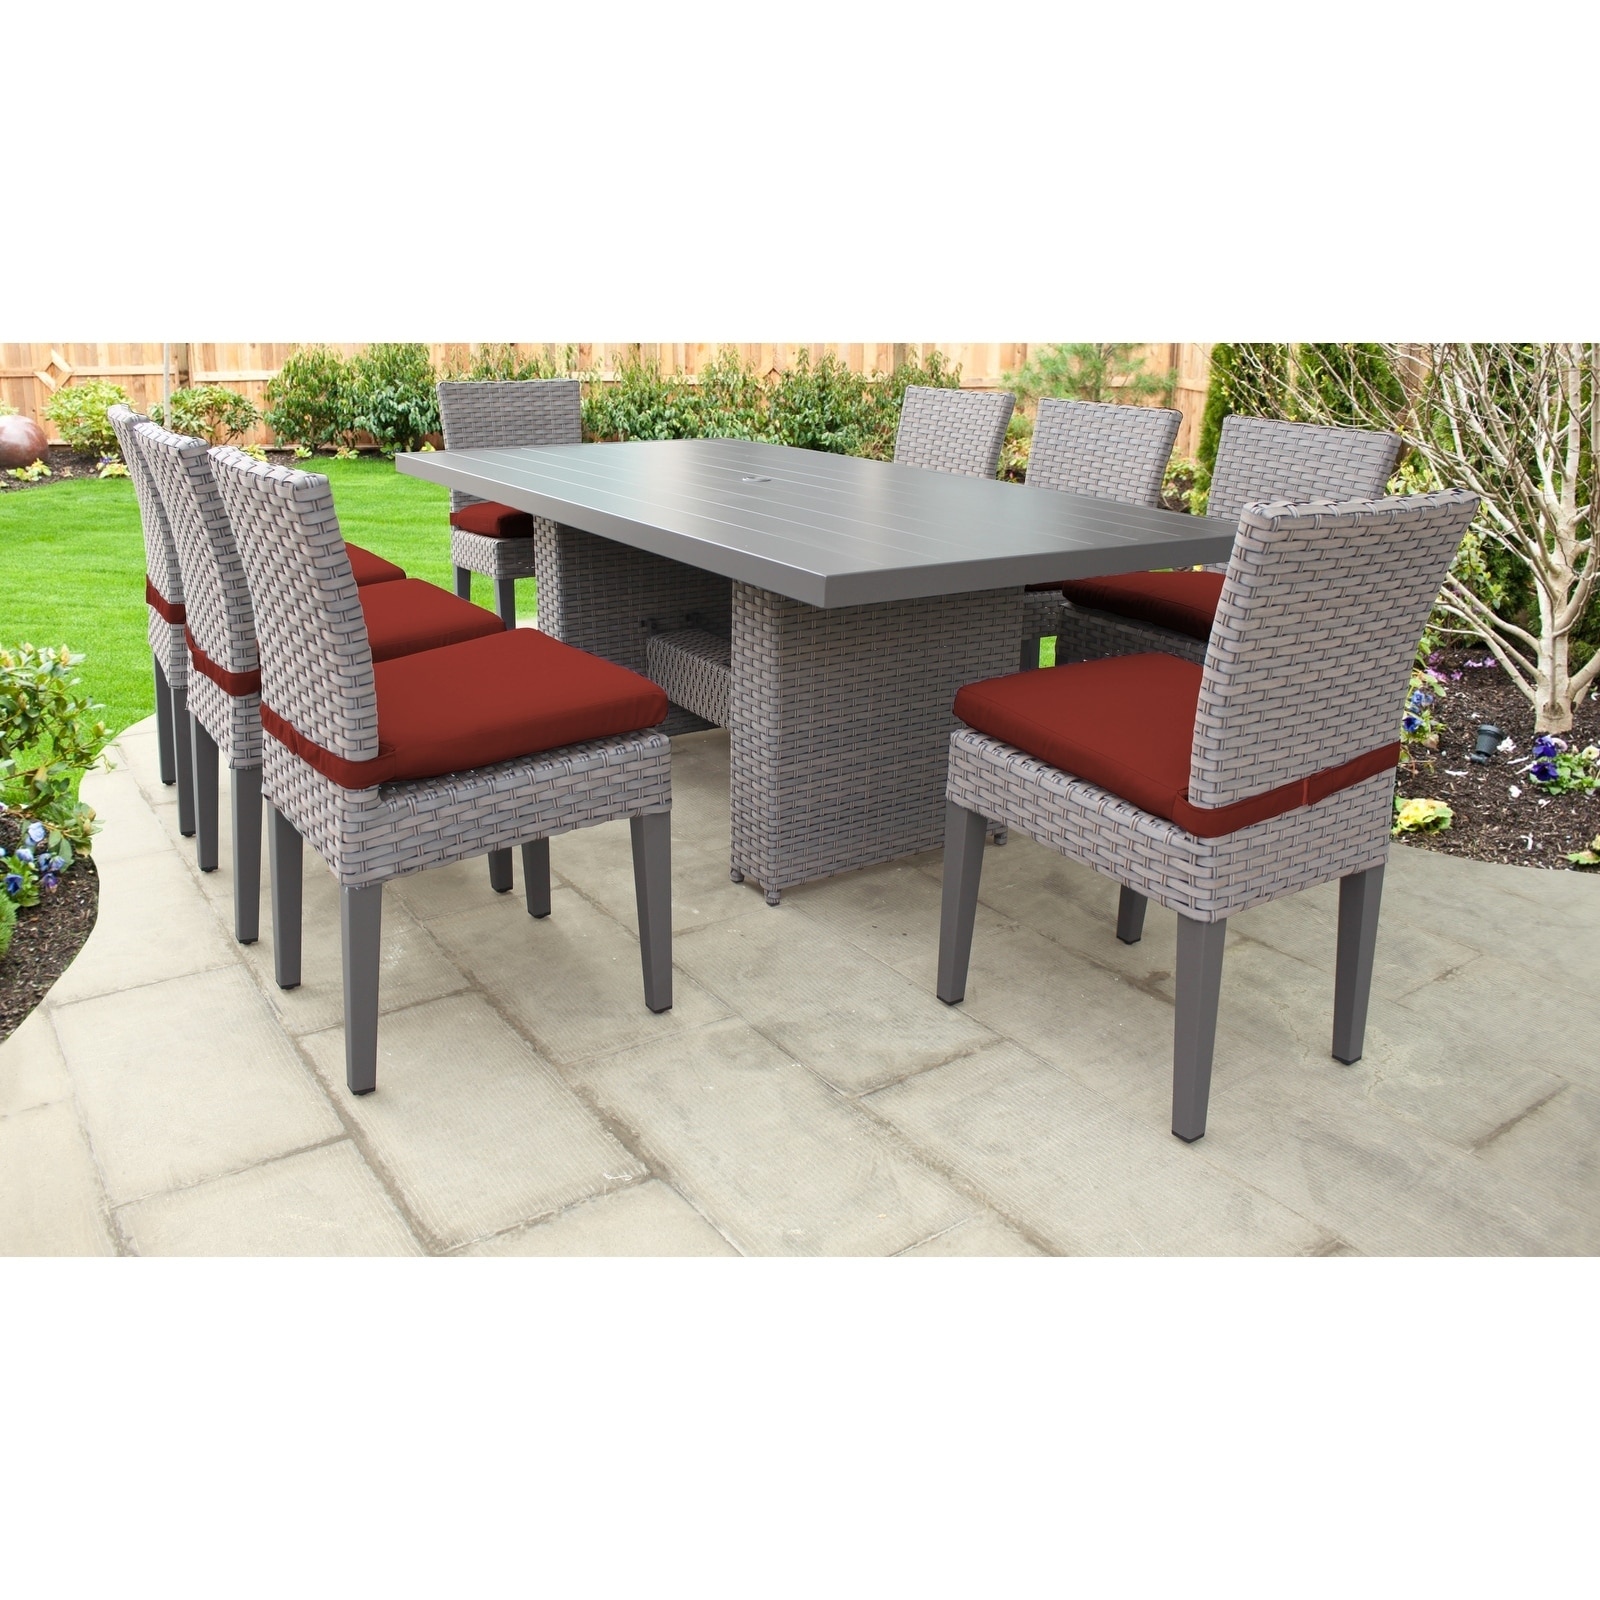 Monterey Rectangular Outdoor Patio Dining Table With 8 Armless Chairs